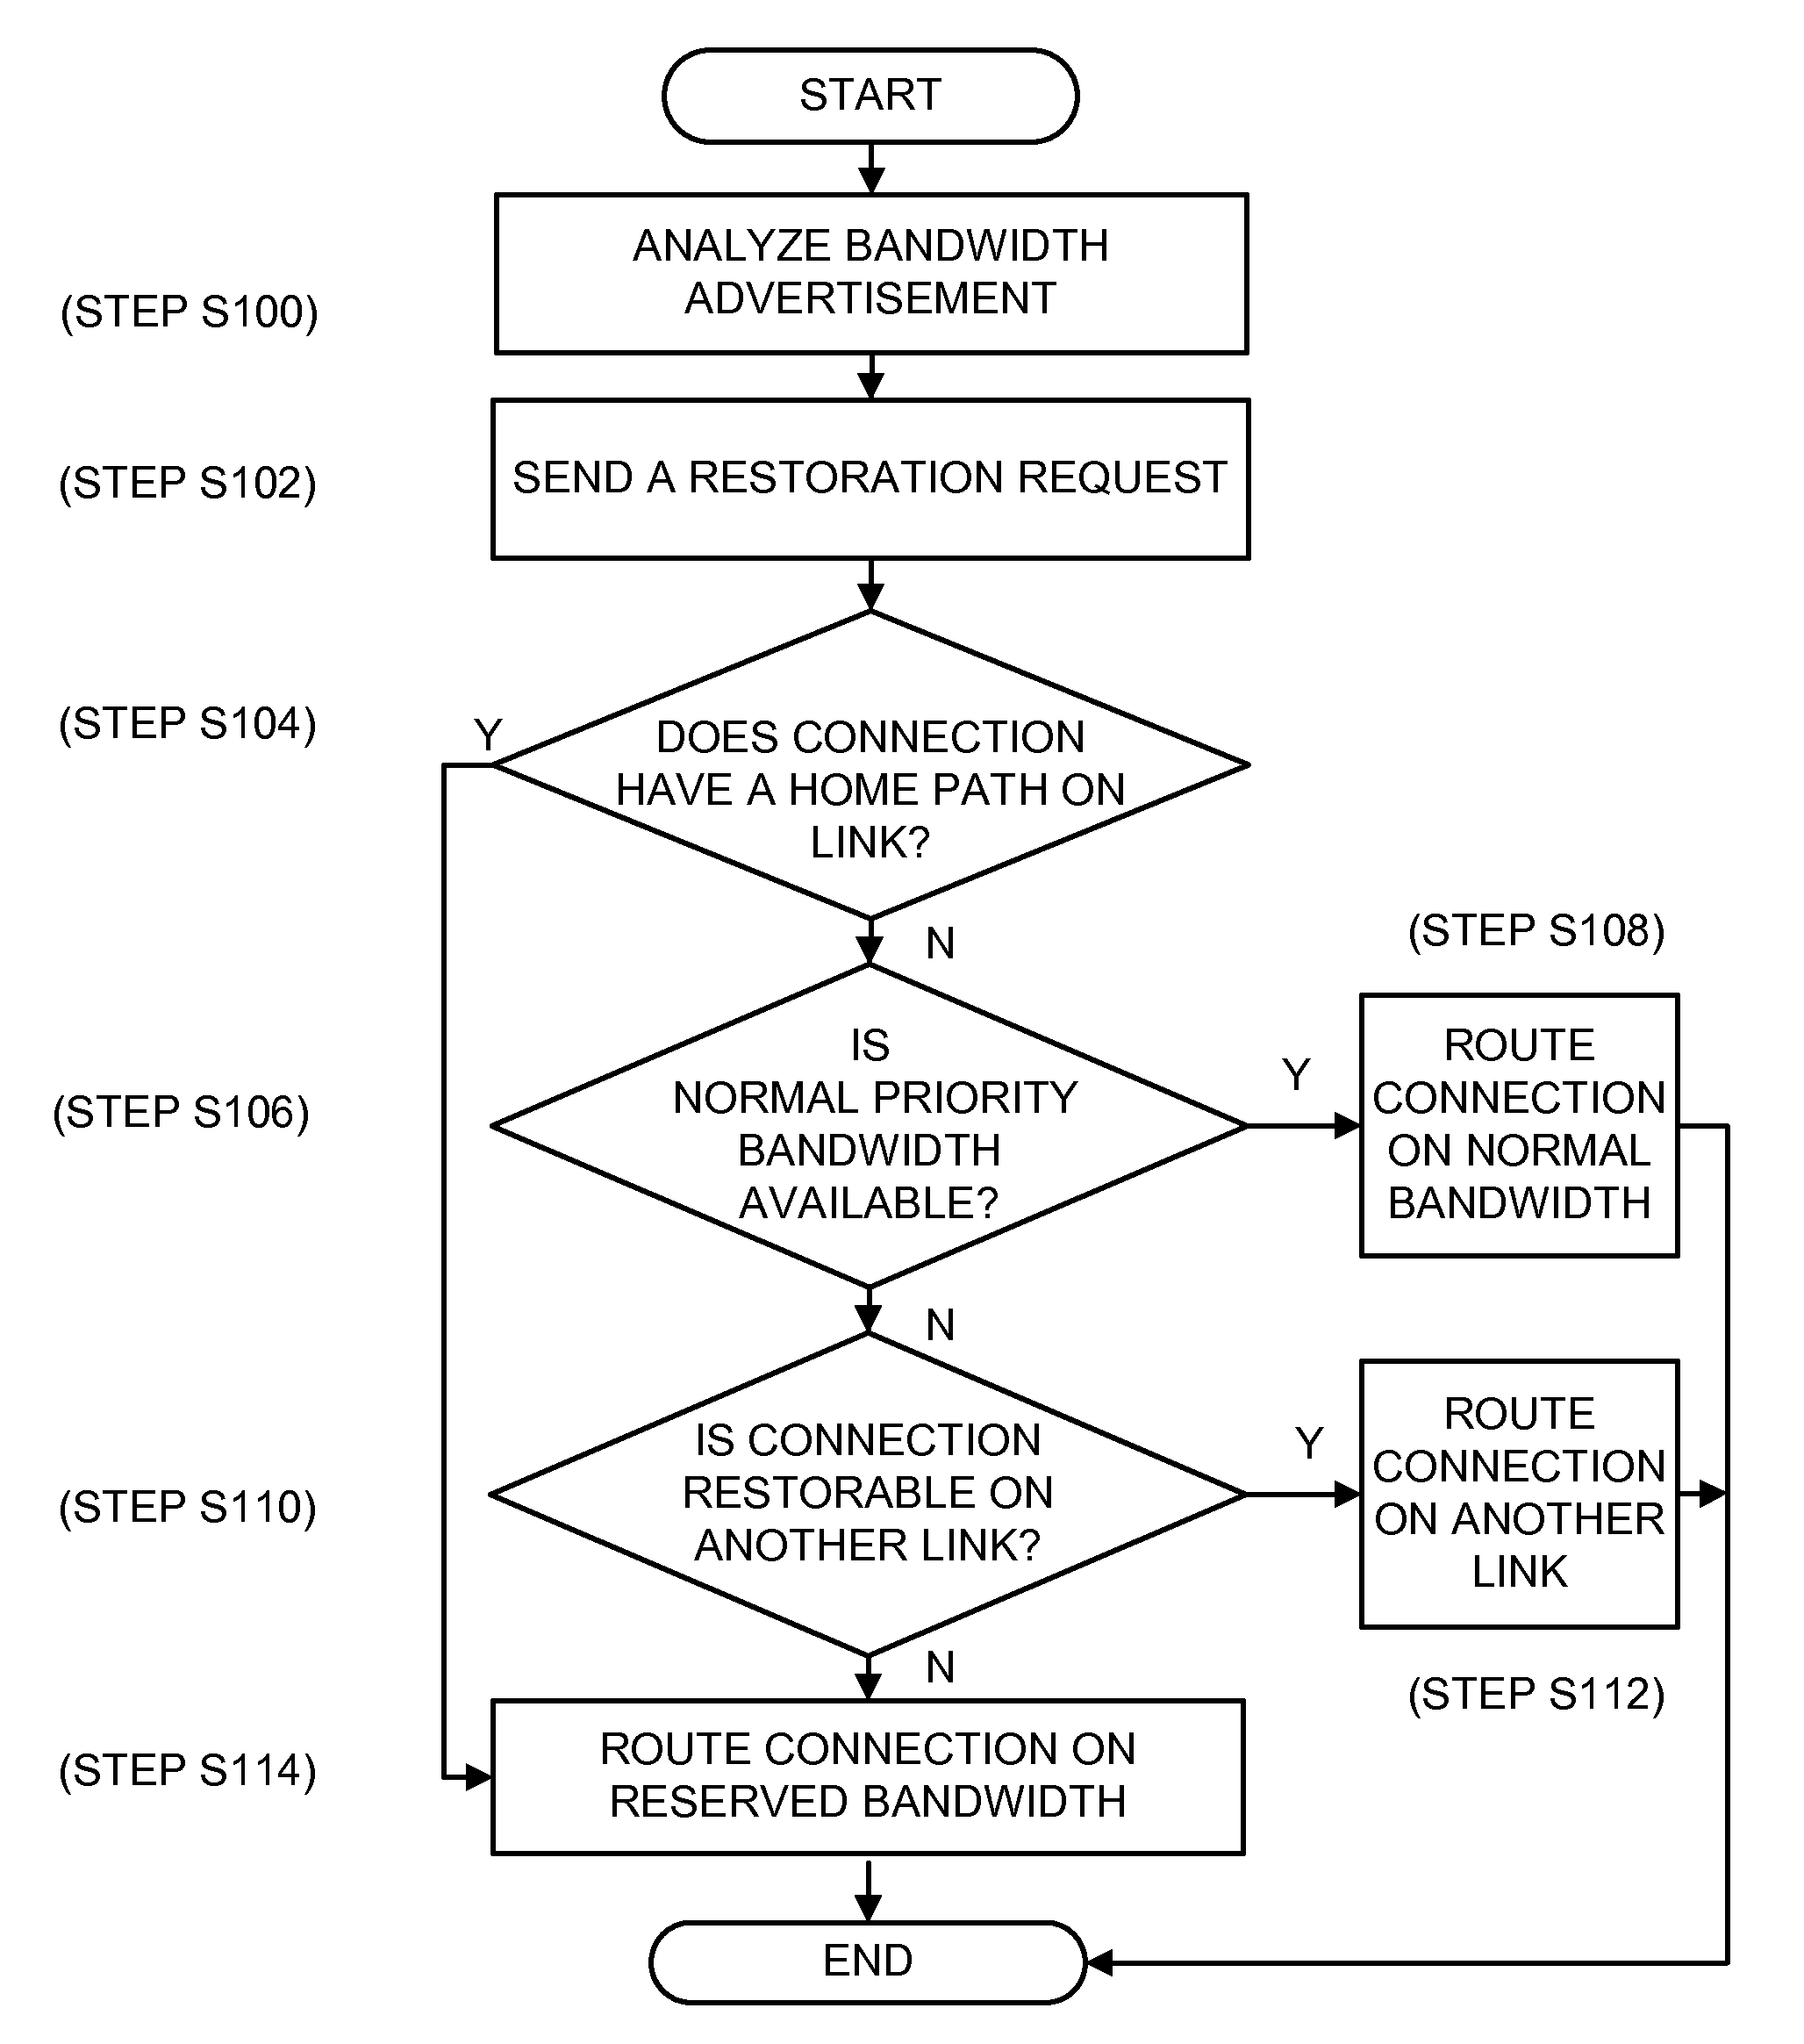 Retention of a sub-network connection home path